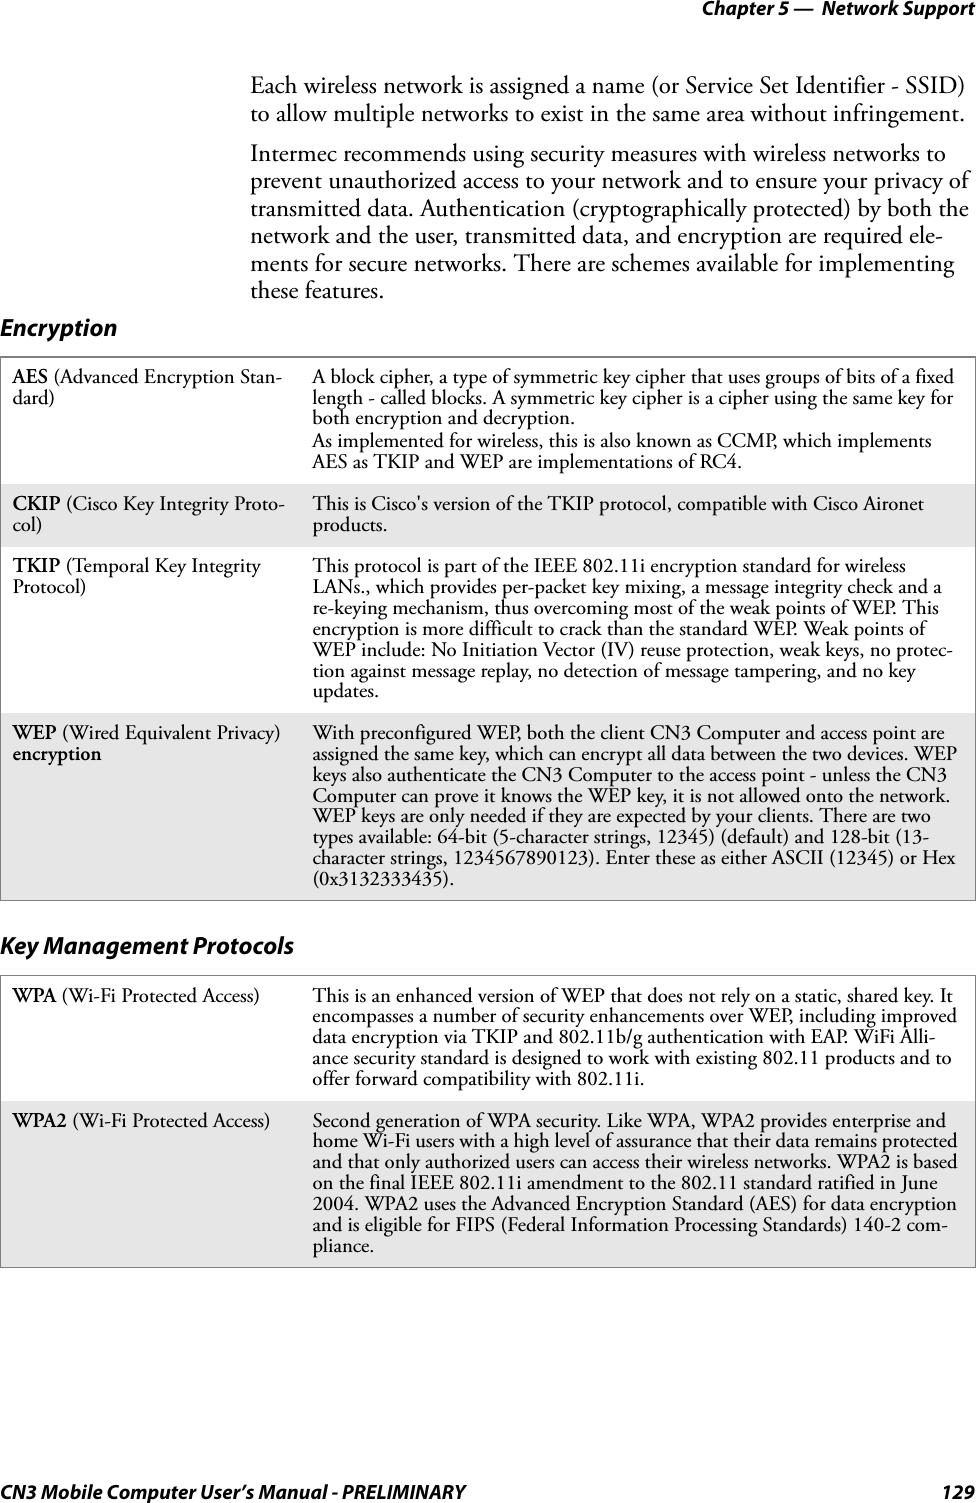 Chapter 5 —  Network SupportCN3 Mobile Computer User’s Manual - PRELIMINARY 129Each wireless network is assigned a name (or Service Set Identifier - SSID) to allow multiple networks to exist in the same area without infringement.Intermec recommends using security measures with wireless networks to prevent unauthorized access to your network and to ensure your privacy of transmitted data. Authentication (cryptographically protected) by both the network and the user, transmitted data, and encryption are required ele-ments for secure networks. There are schemes available for implementing these features.EncryptionAES (Advanced Encryption Stan-dard)A block cipher, a type of symmetric key cipher that uses groups of bits of a fixed length - called blocks. A symmetric key cipher is a cipher using the same key for both encryption and decryption.As implemented for wireless, this is also known as CCMP, which implements AES as TKIP and WEP are implementations of RC4.CKIP (Cisco Key Integrity Proto-col)This is Cisco&apos;s version of the TKIP protocol, compatible with Cisco Aironet products.TKIP (Temporal Key Integrity Protocol)This protocol is part of the IEEE 802.11i encryption standard for wireless LANs., which provides per-packet key mixing, a message integrity check and a re-keying mechanism, thus overcoming most of the weak points of WEP. This encryption is more difficult to crack than the standard WEP. Weak points of WEP include: No Initiation Vector (IV) reuse protection, weak keys, no protec-tion against message replay, no detection of message tampering, and no key updates.WEP (Wired Equivalent Privacy) encryptionWith preconfigured WEP, both the client CN3 Computer and access point are assigned the same key, which can encrypt all data between the two devices. WEP keys also authenticate the CN3 Computer to the access point - unless the CN3 Computer can prove it knows the WEP key, it is not allowed onto the network. WEP keys are only needed if they are expected by your clients. There are two types available: 64-bit (5-character strings, 12345) (default) and 128-bit (13-character strings, 1234567890123). Enter these as either ASCII (12345) or Hex (0x3132333435).Key Management ProtocolsWPA (Wi-Fi Protected Access) This is an enhanced version of WEP that does not rely on a static, shared key. It encompasses a number of security enhancements over WEP, including improved data encryption via TKIP and 802.11b/g authentication with EAP. WiFi Alli-ance security standard is designed to work with existing 802.11 products and to offer forward compatibility with 802.11i.WPA2 (Wi-Fi Protected Access) Second generation of WPA security. Like WPA, WPA2 provides enterprise and home Wi-Fi users with a high level of assurance that their data remains protected and that only authorized users can access their wireless networks. WPA2 is based on the final IEEE 802.11i amendment to the 802.11 standard ratified in June 2004. WPA2 uses the Advanced Encryption Standard (AES) for data encryption and is eligible for FIPS (Federal Information Processing Standards) 140-2 com-pliance. 